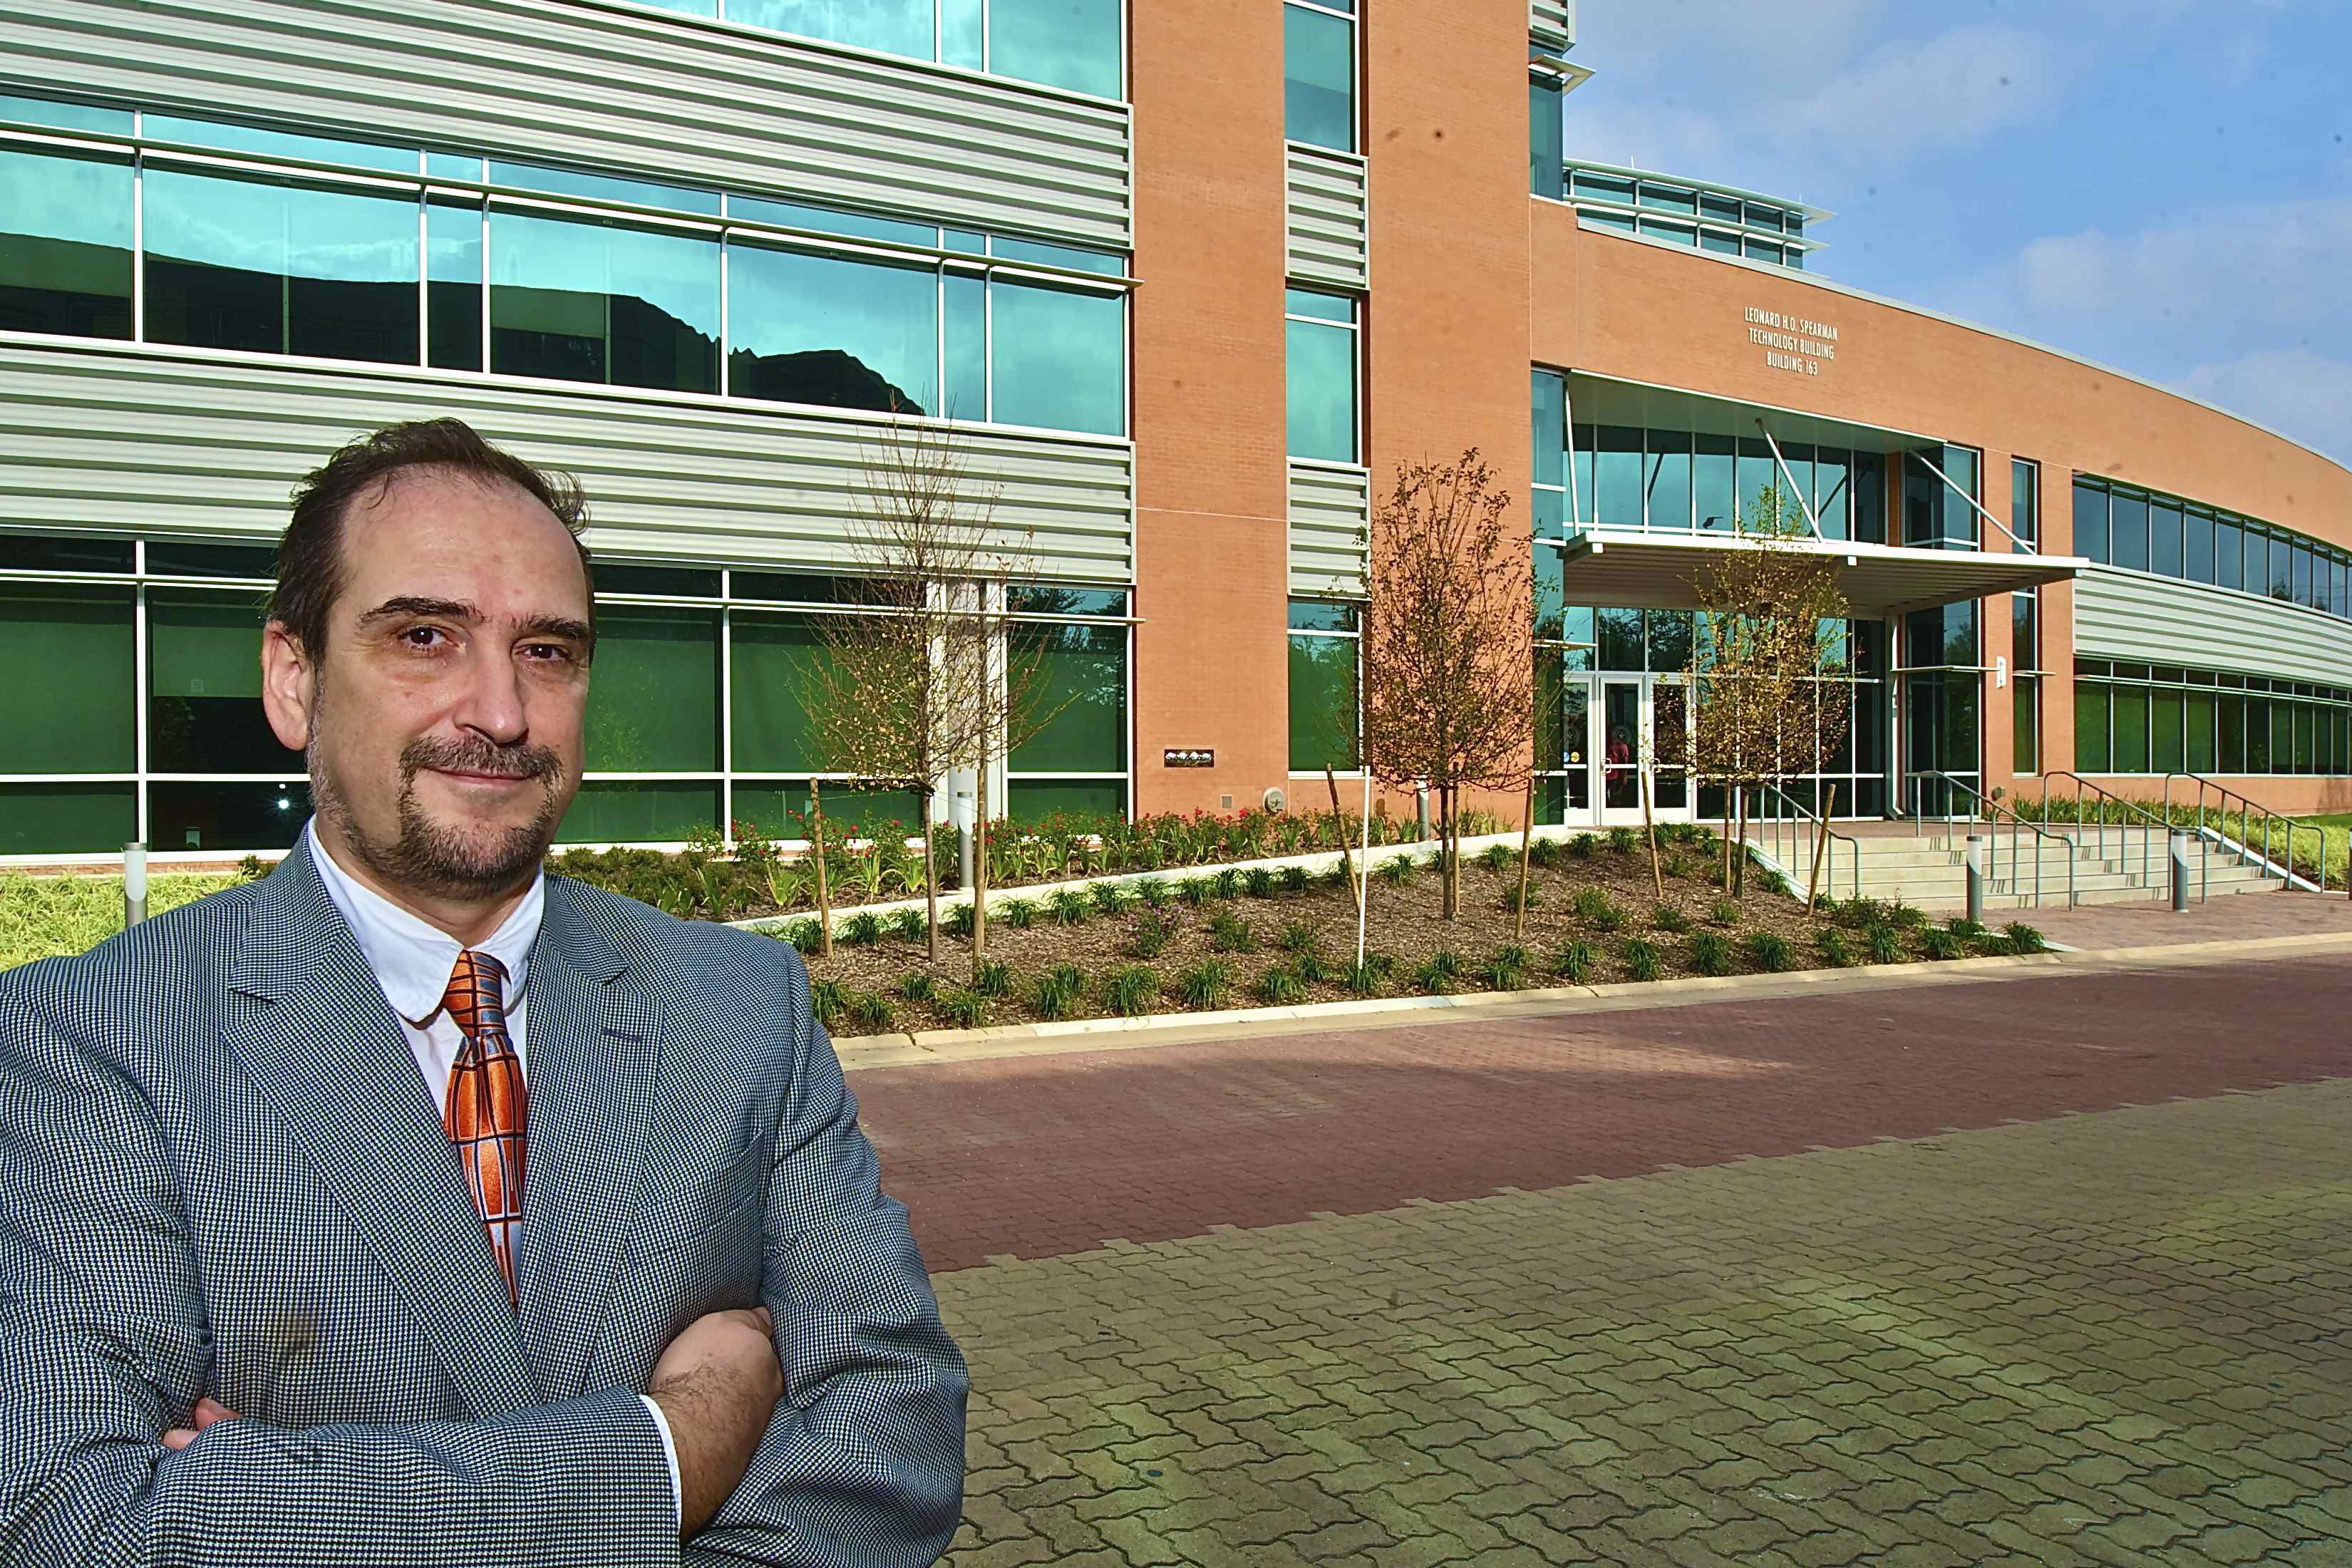 Daniel Vrinceanu stands with his arms crossed and a relaxed closed-mouth smile outside the Leonard H.O. Spearman Technology Building at Texas Southern University. Photo is courtesy of Vrinceanu.